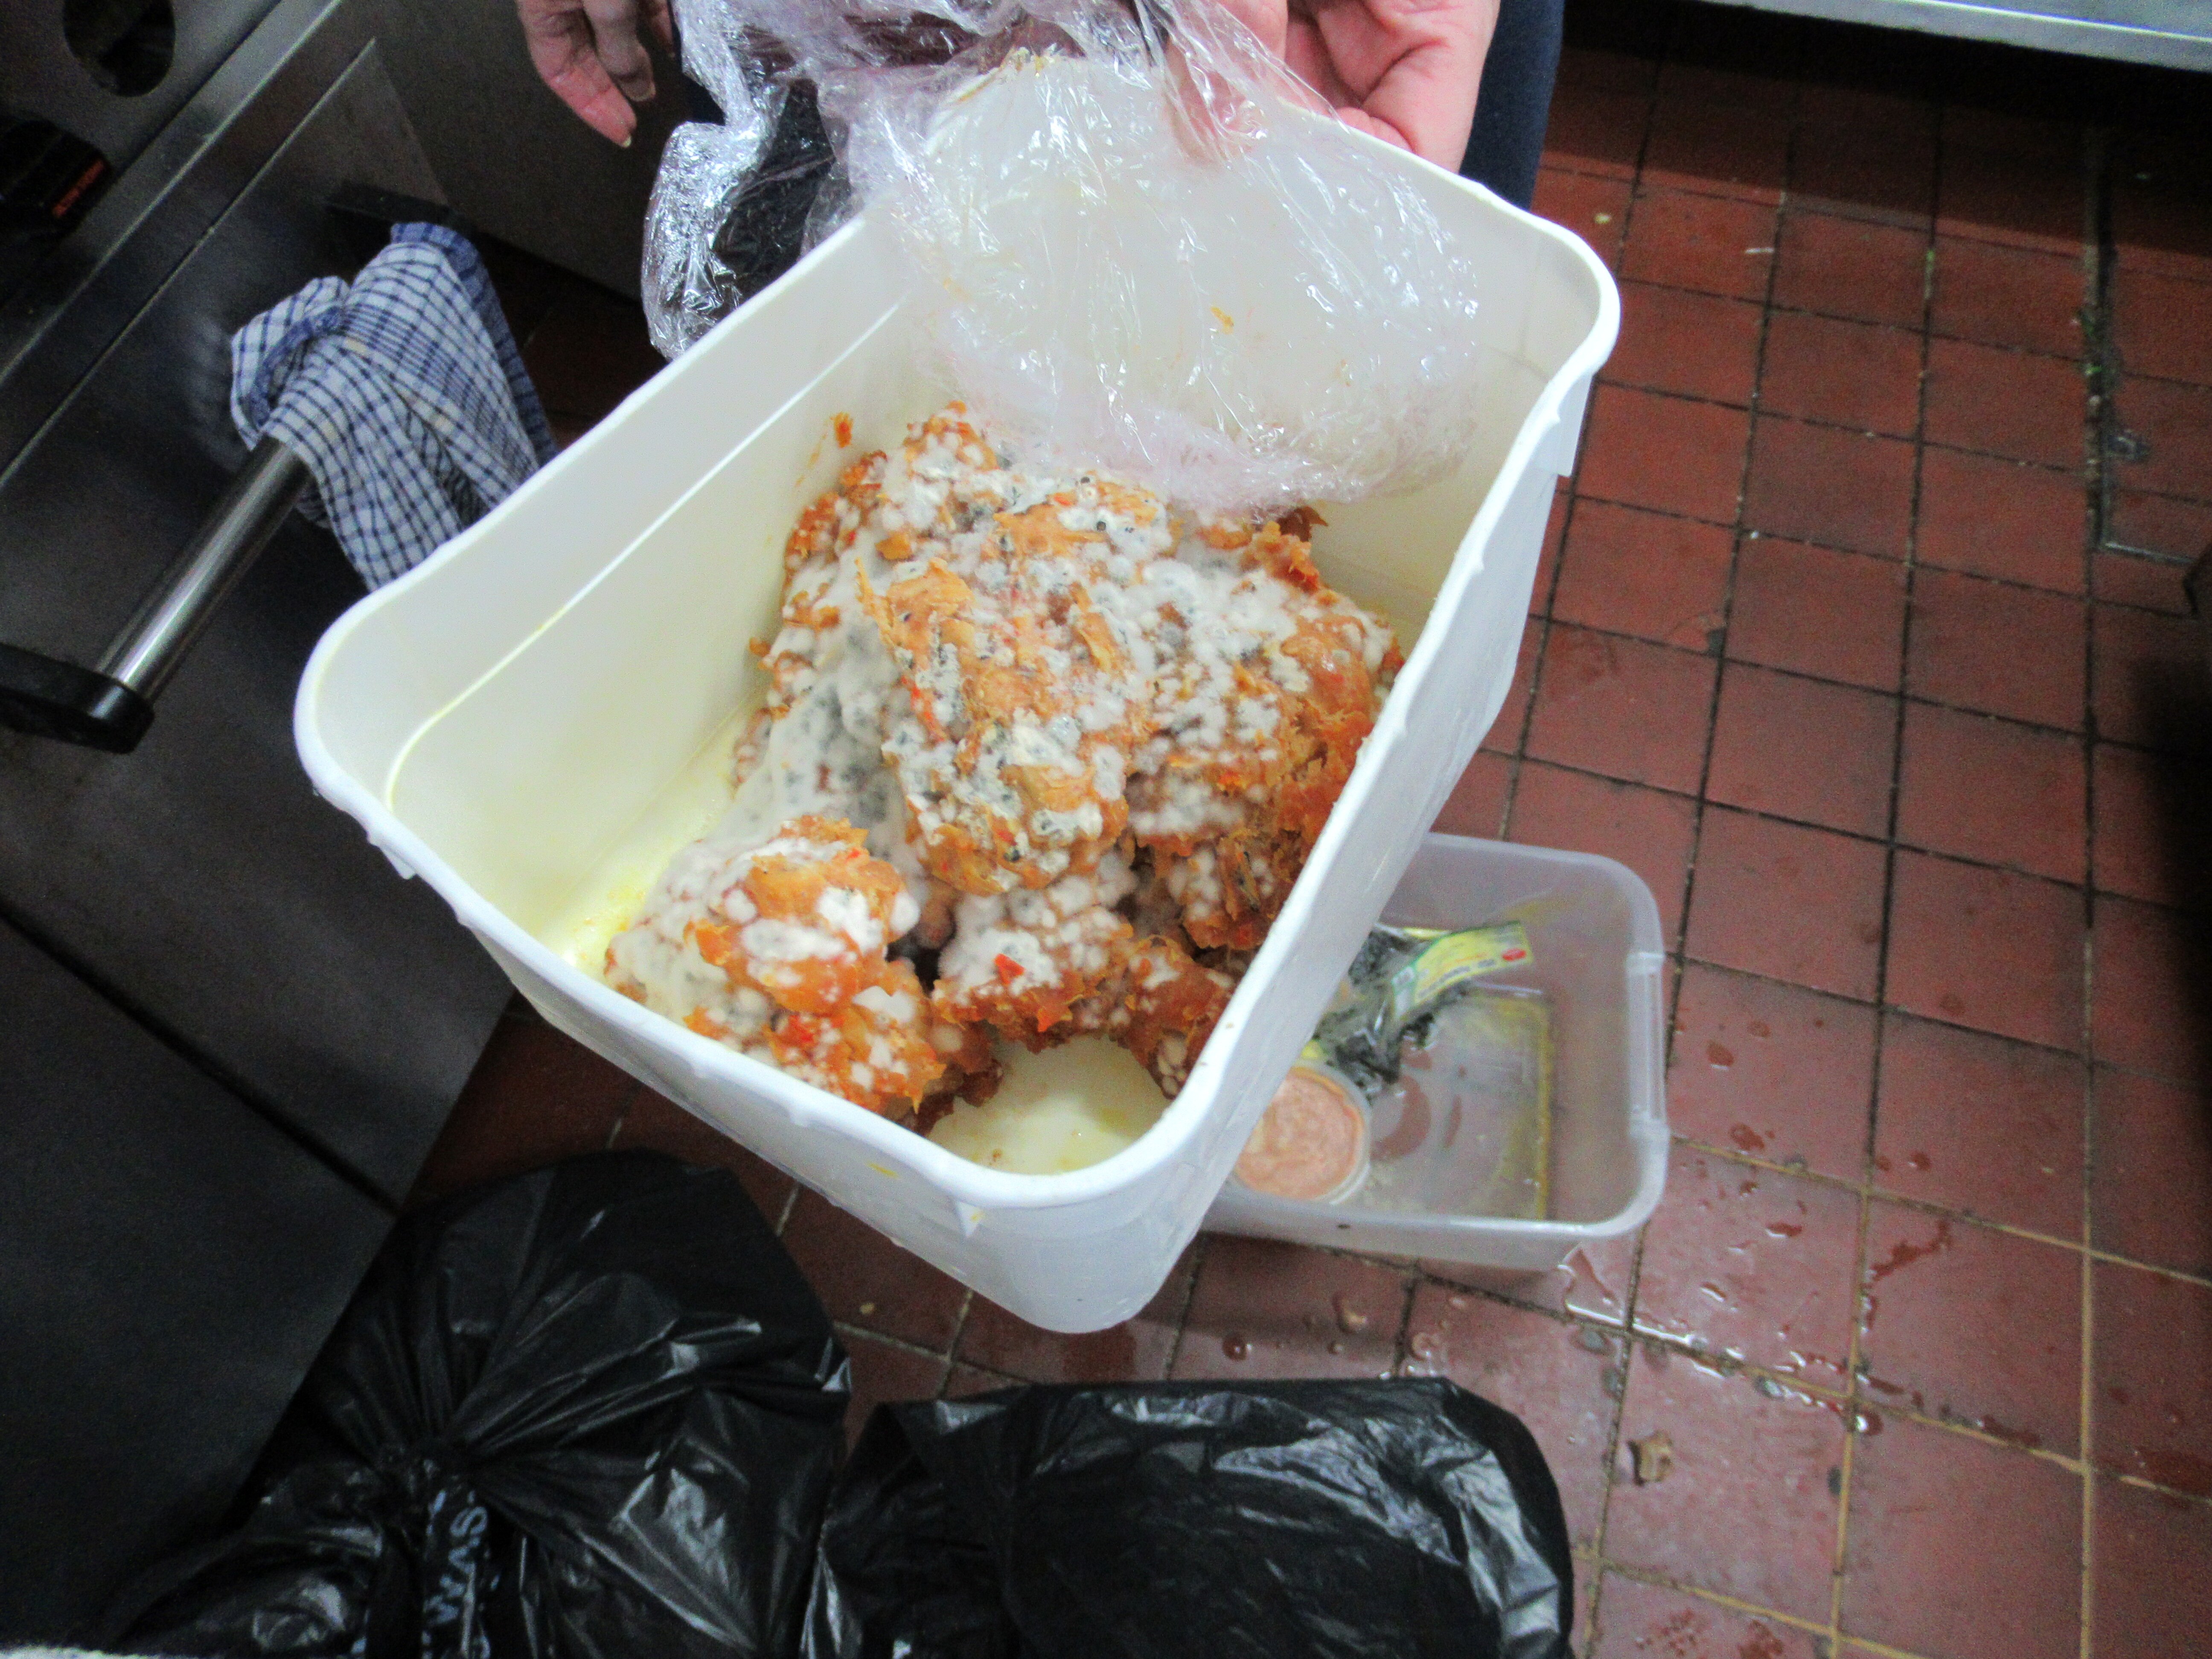 Restaurant owner fined more than £10,000 after trying to claim mouldy chicken was crab meat